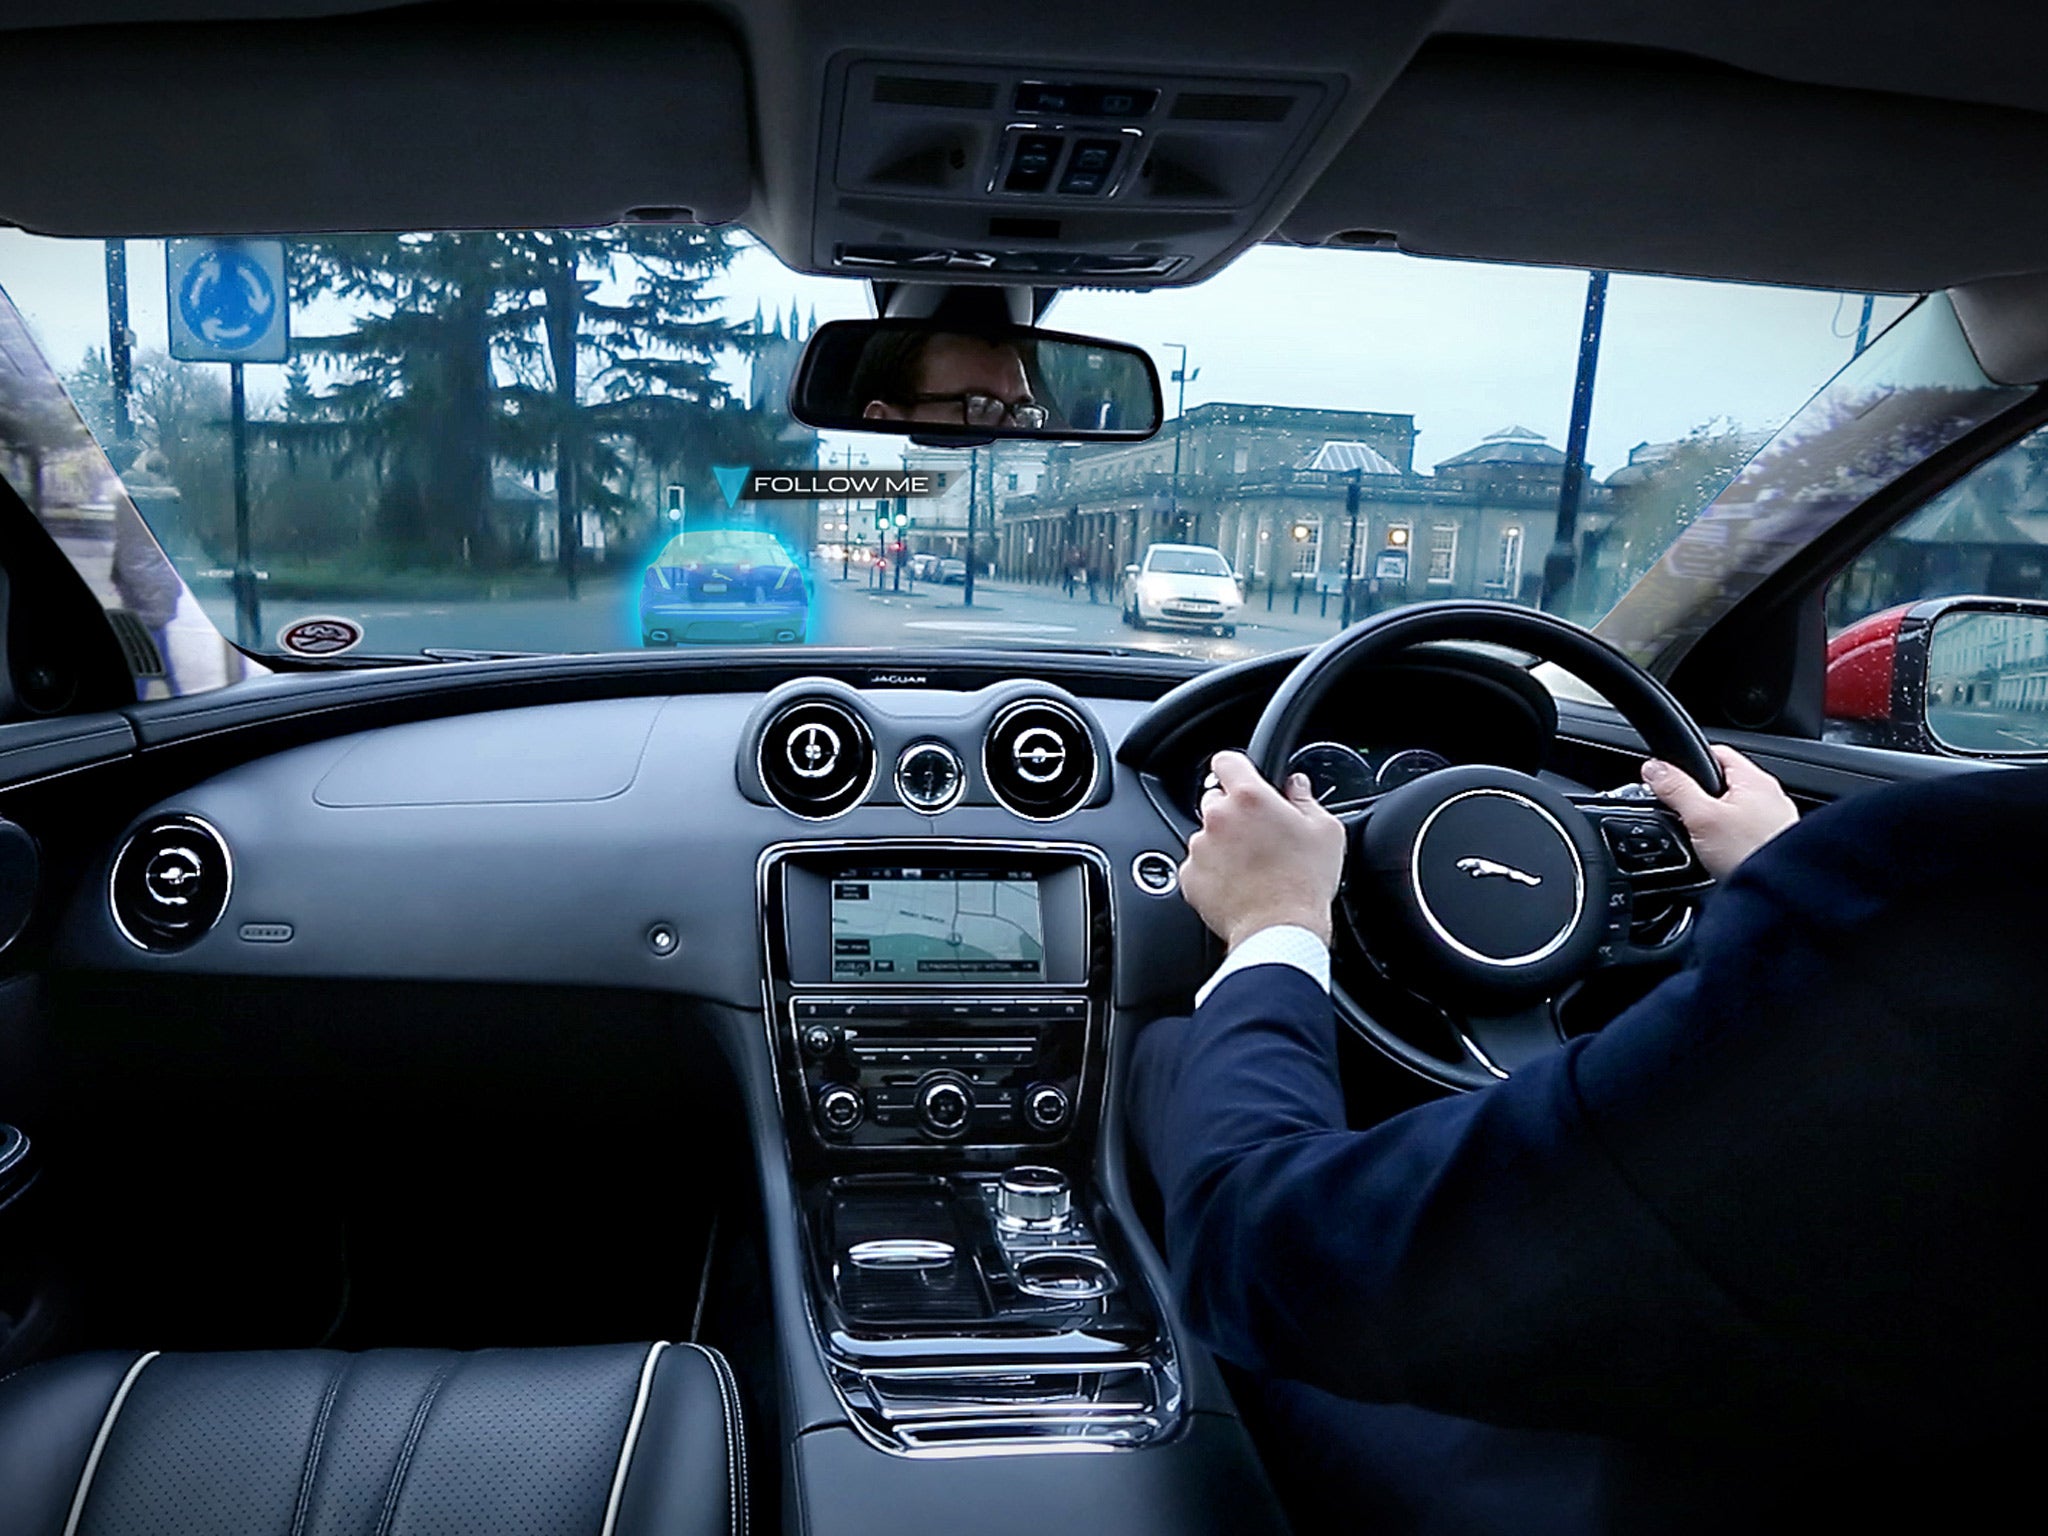 The windscreen projects a virtual car to follow, which Jaguar says is more natural and safe than normal sat navs